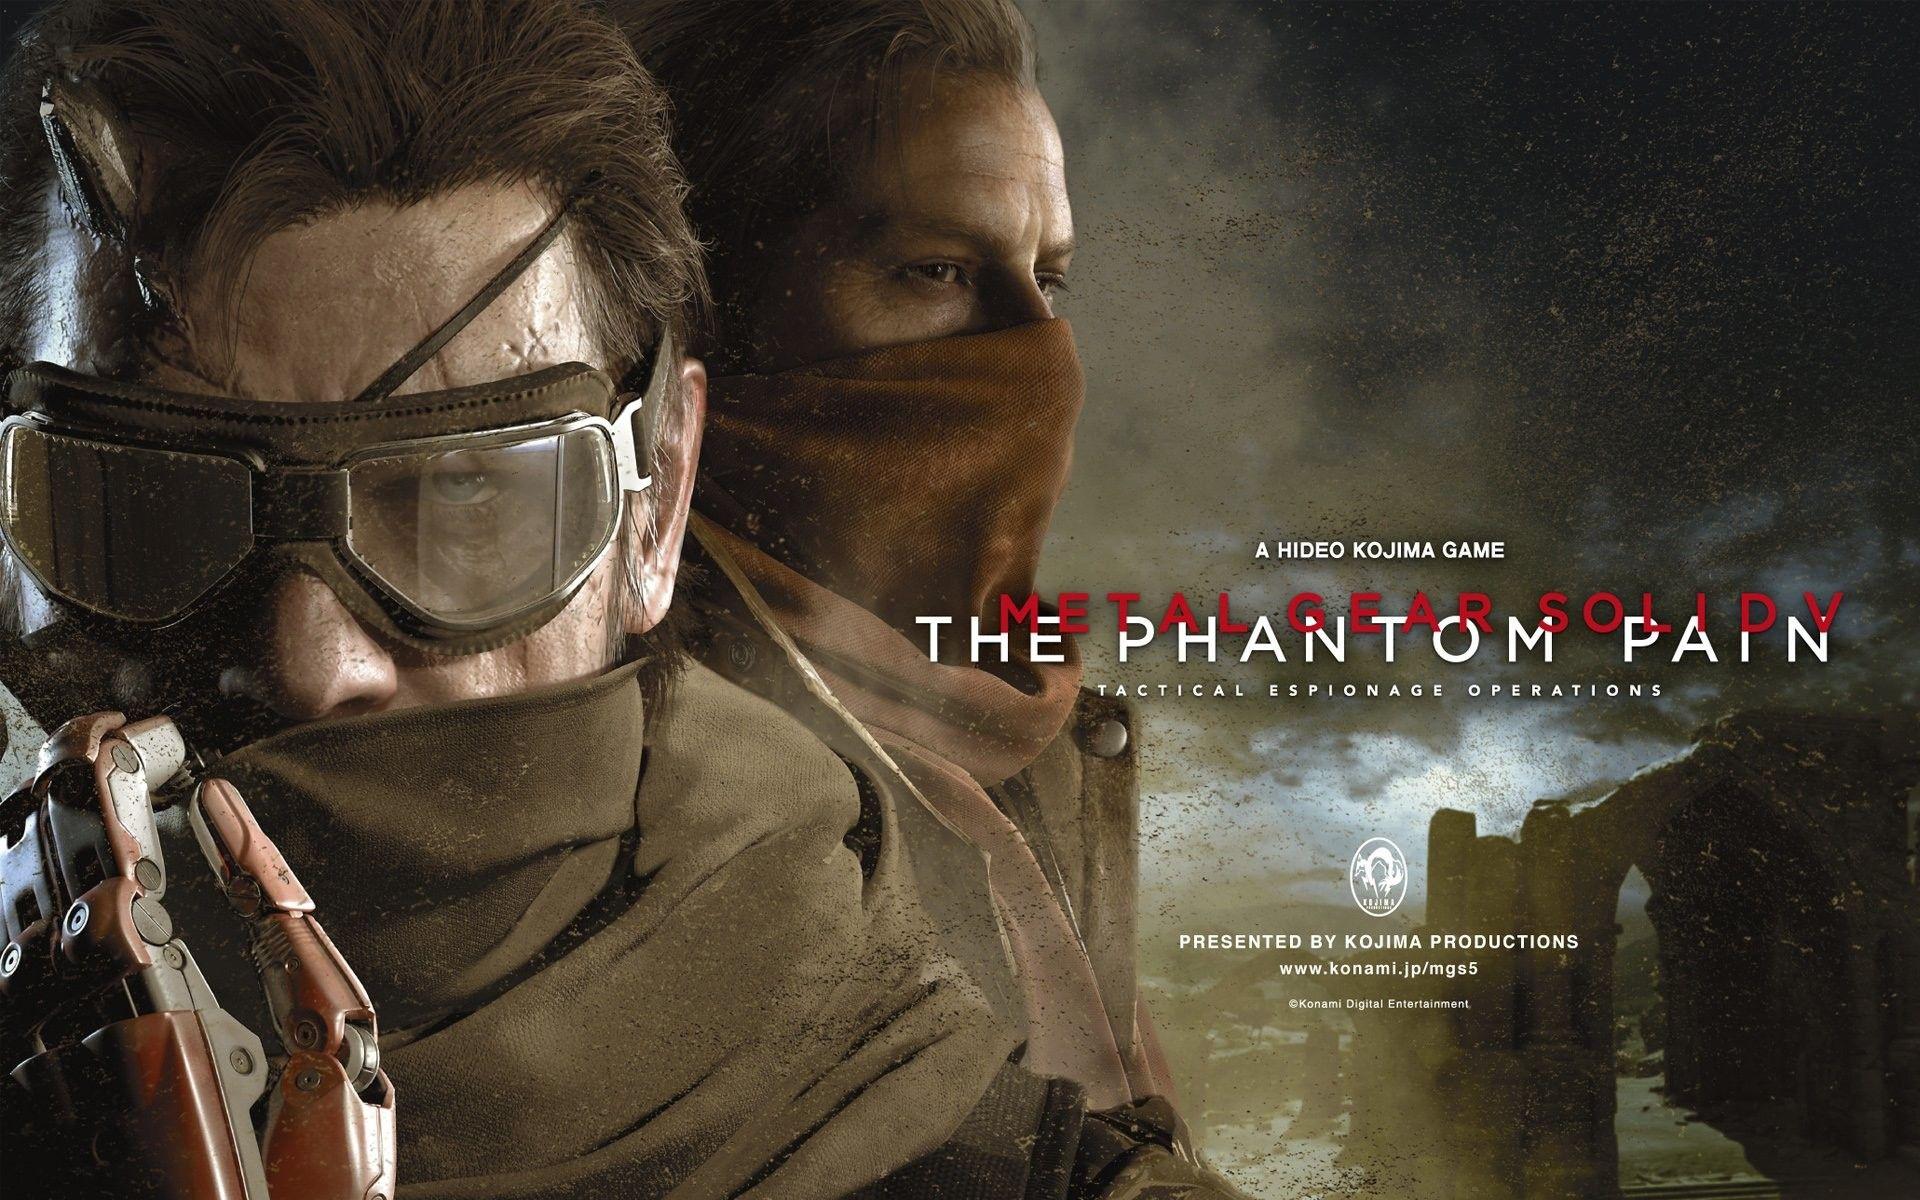 Mgs 5 Wallpapers Top Free Mgs 5 Backgrounds Wallpaperaccess